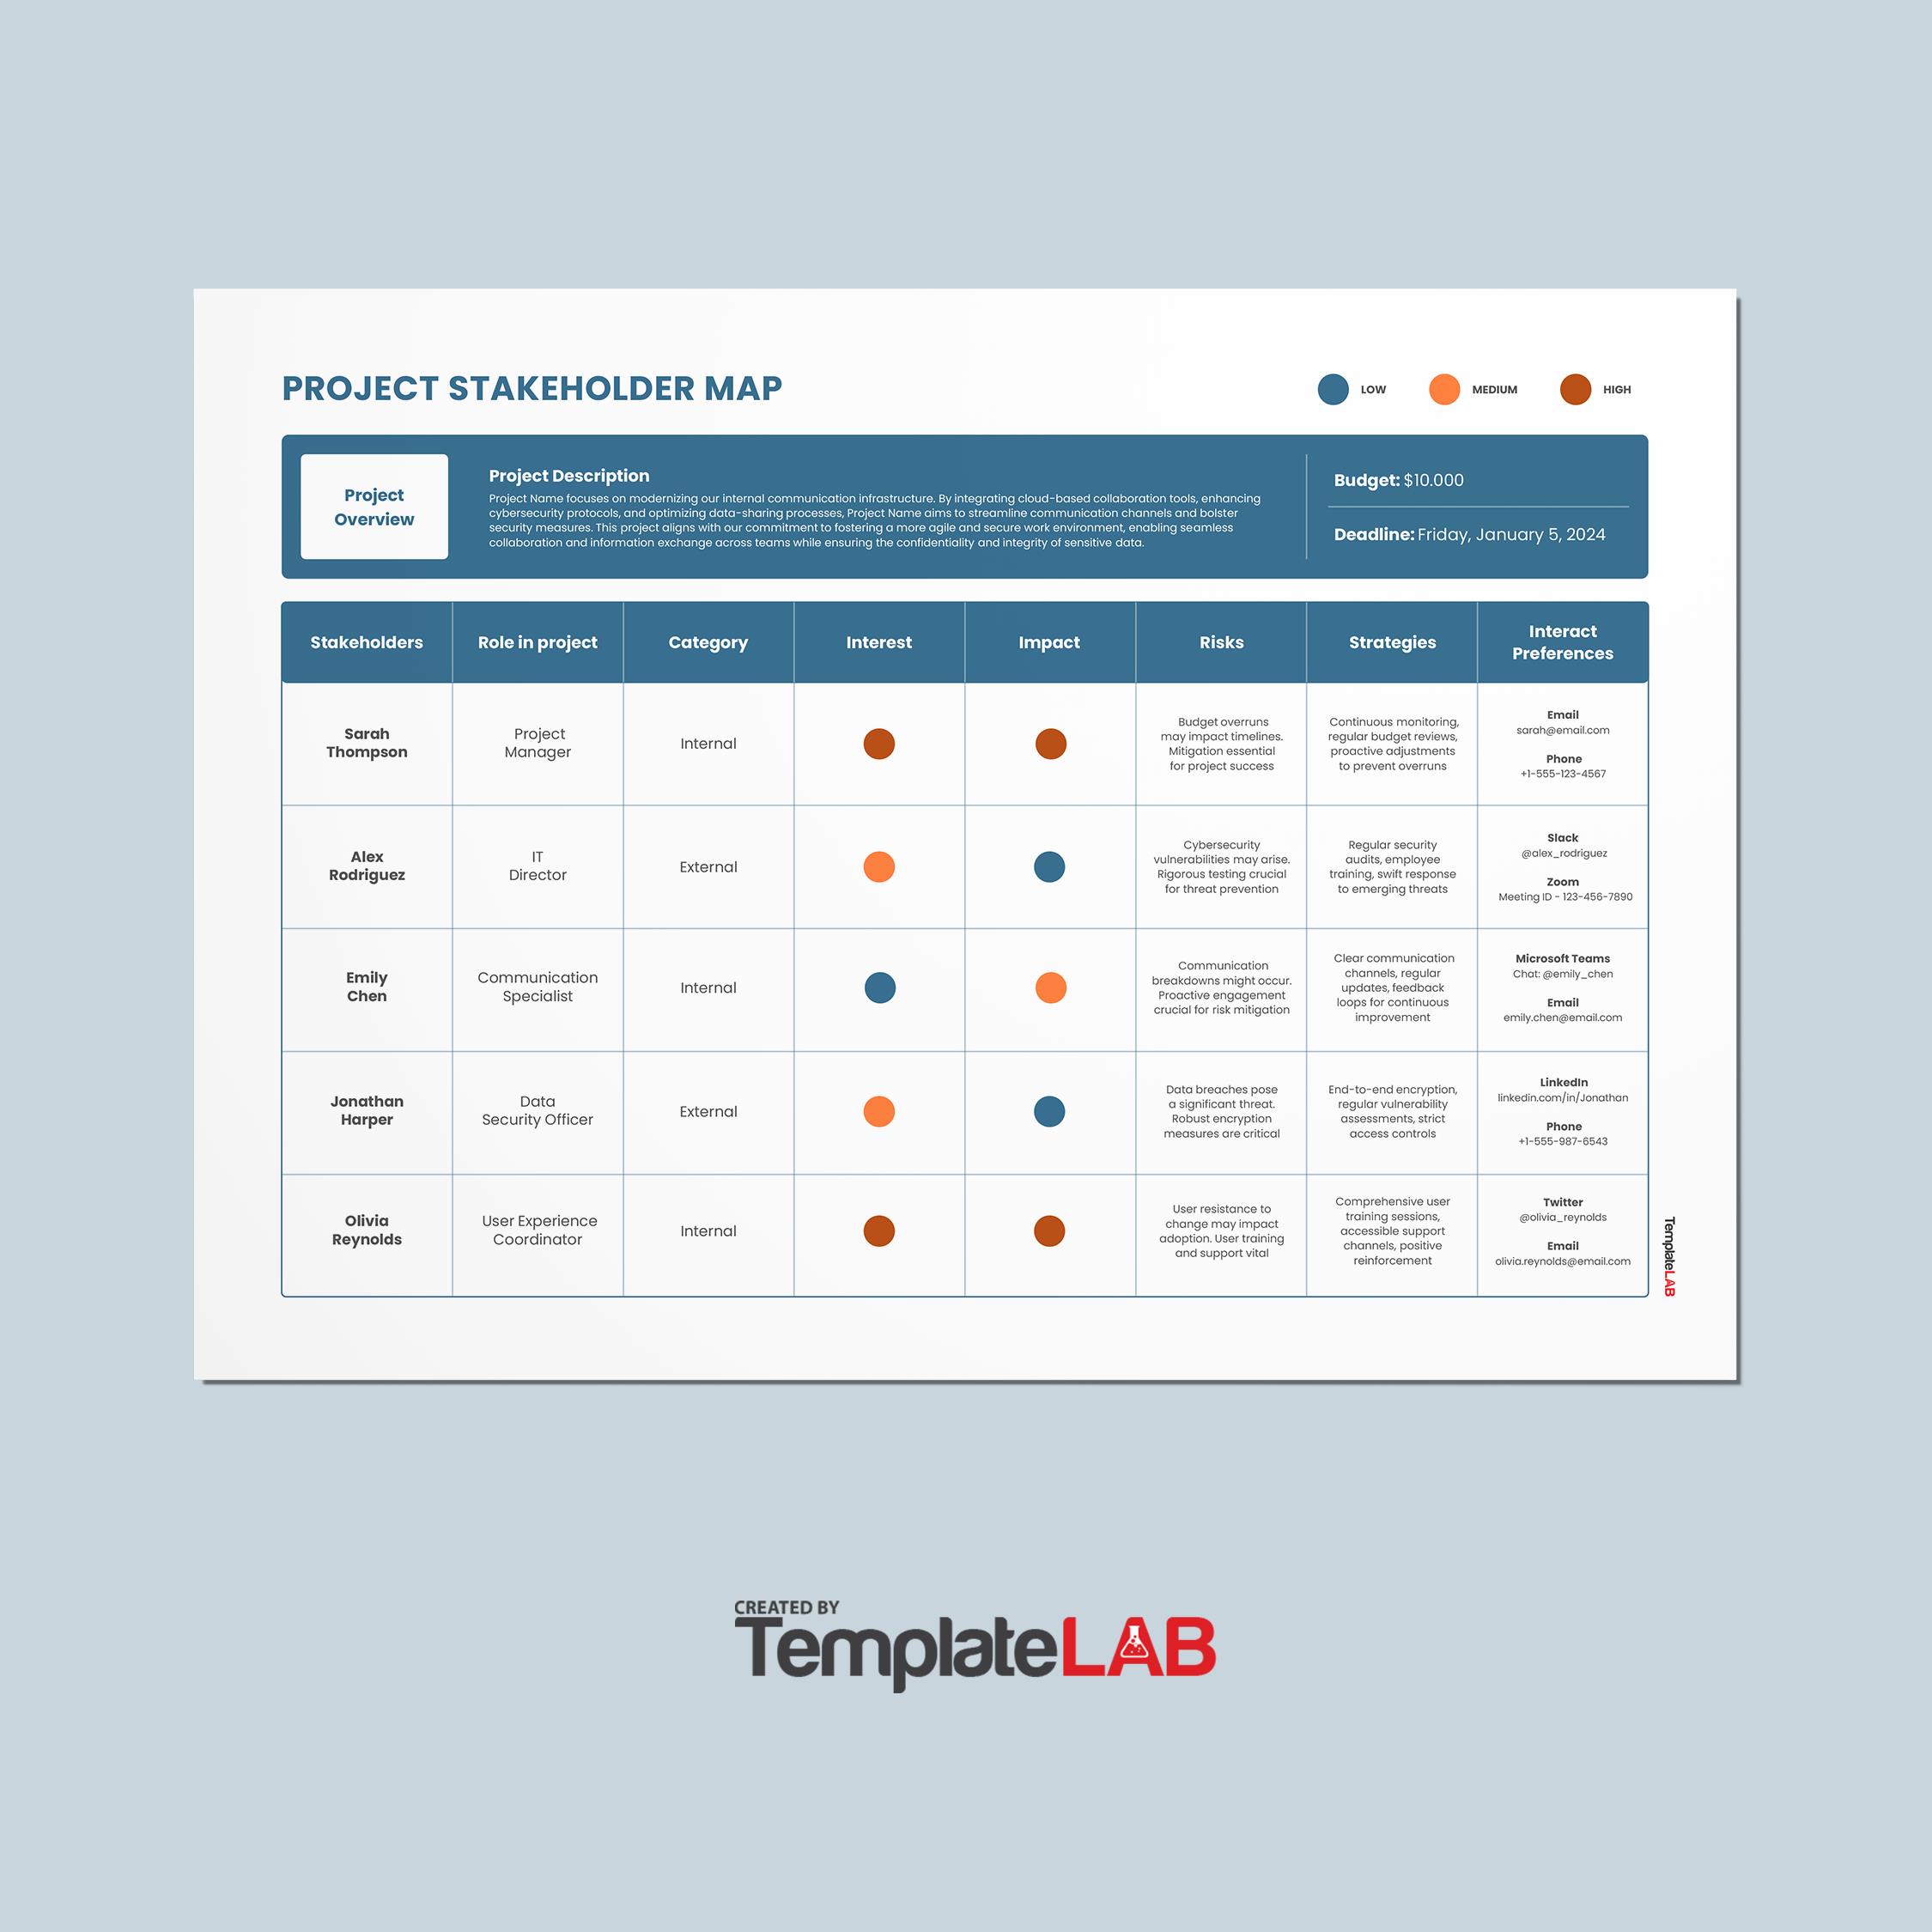 27 Stakeholder Map Templates (Word, Excel & PowerPoint)